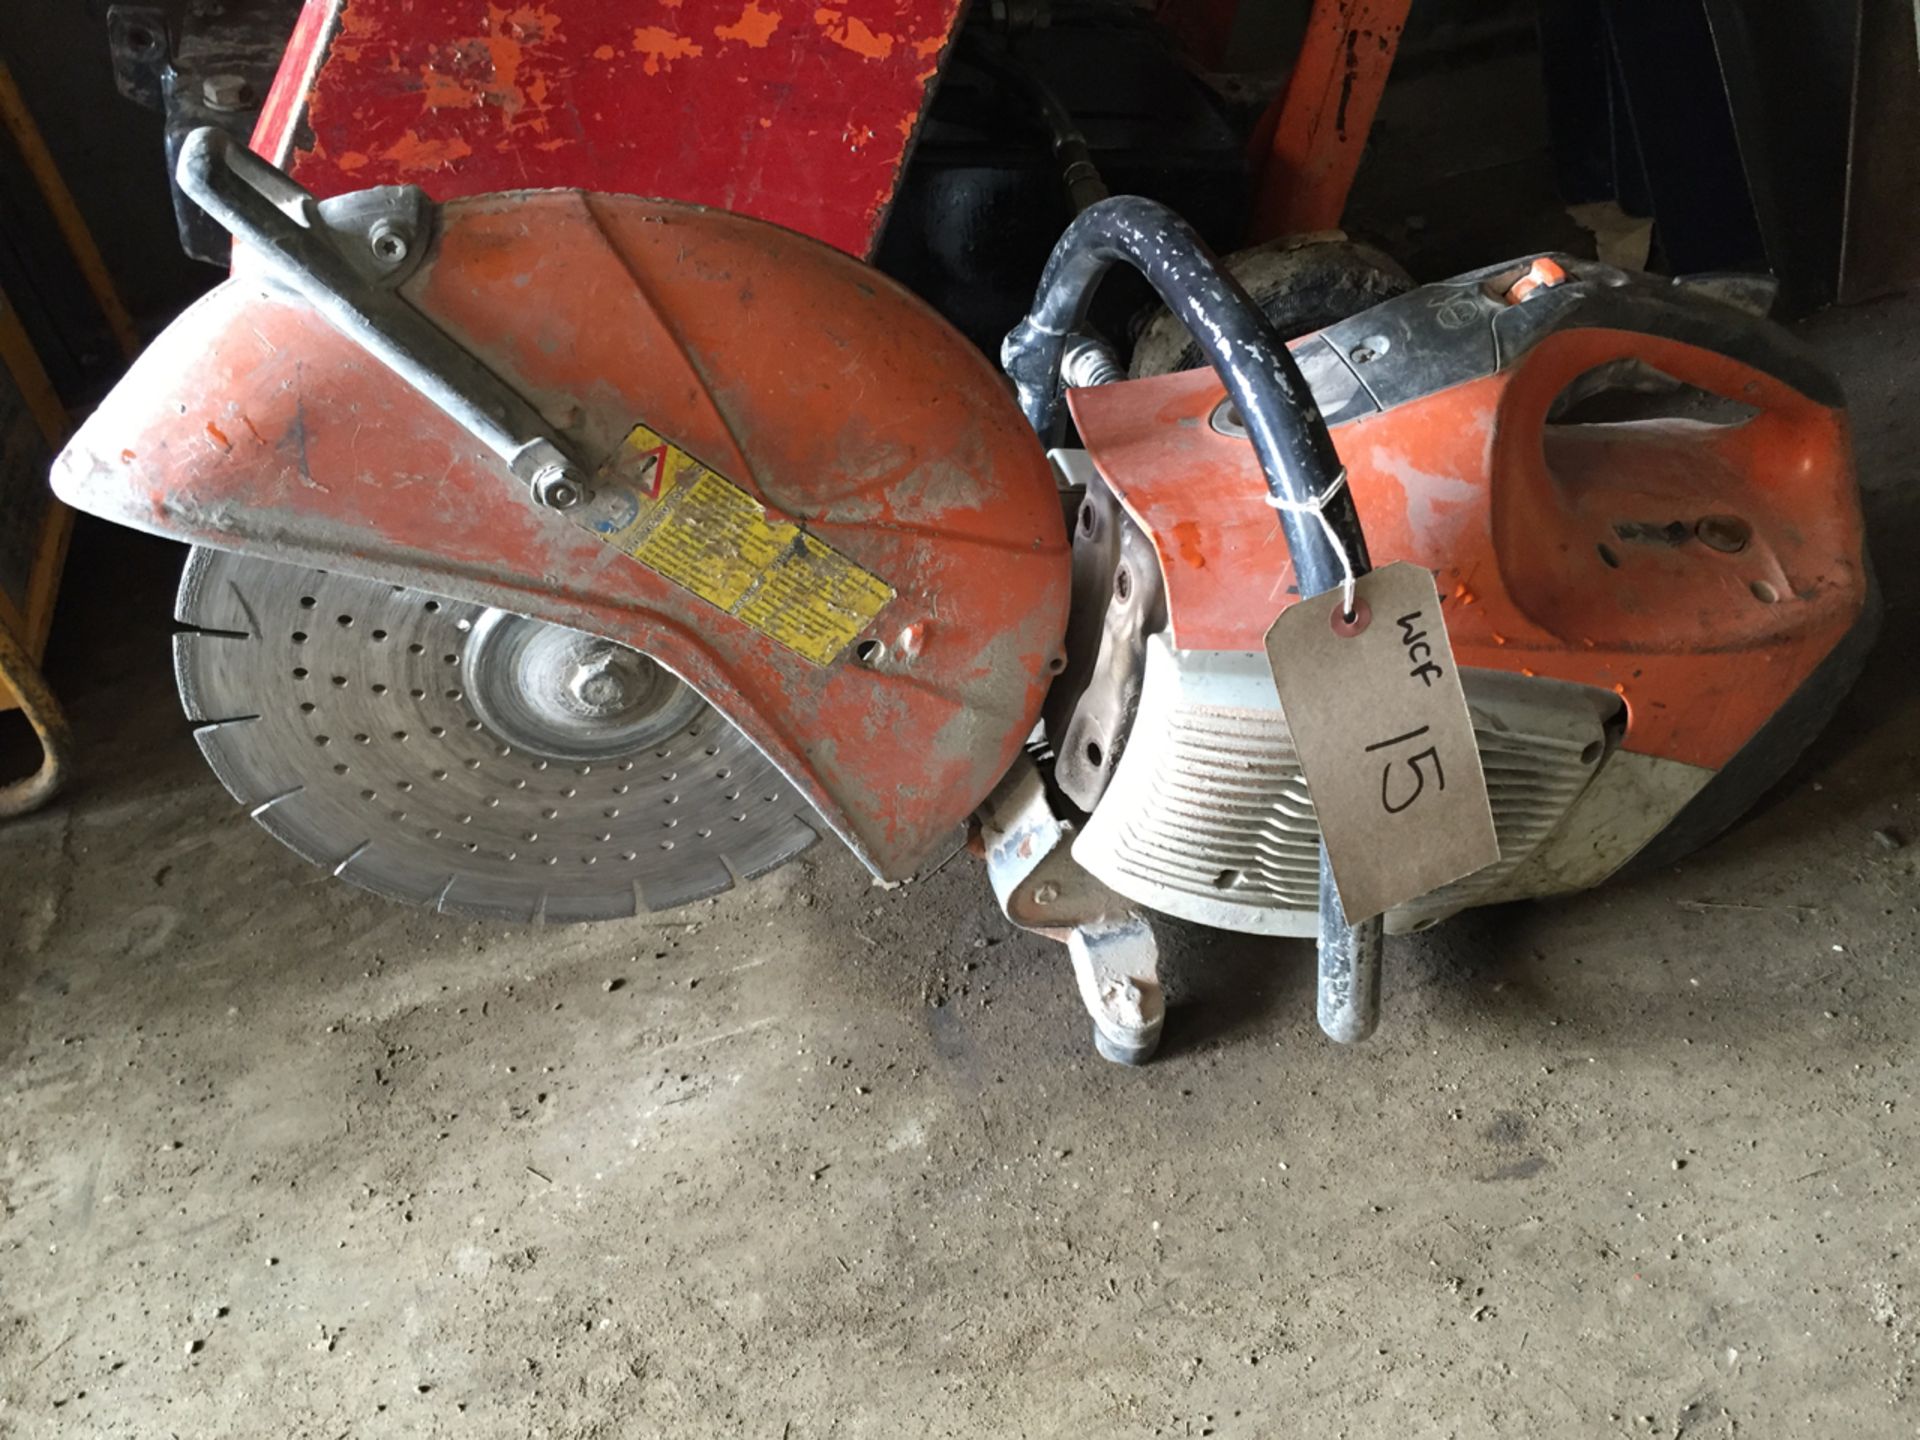 Stihl TS410 Petrol Saw - Fully working - No Reserve - Image 3 of 3